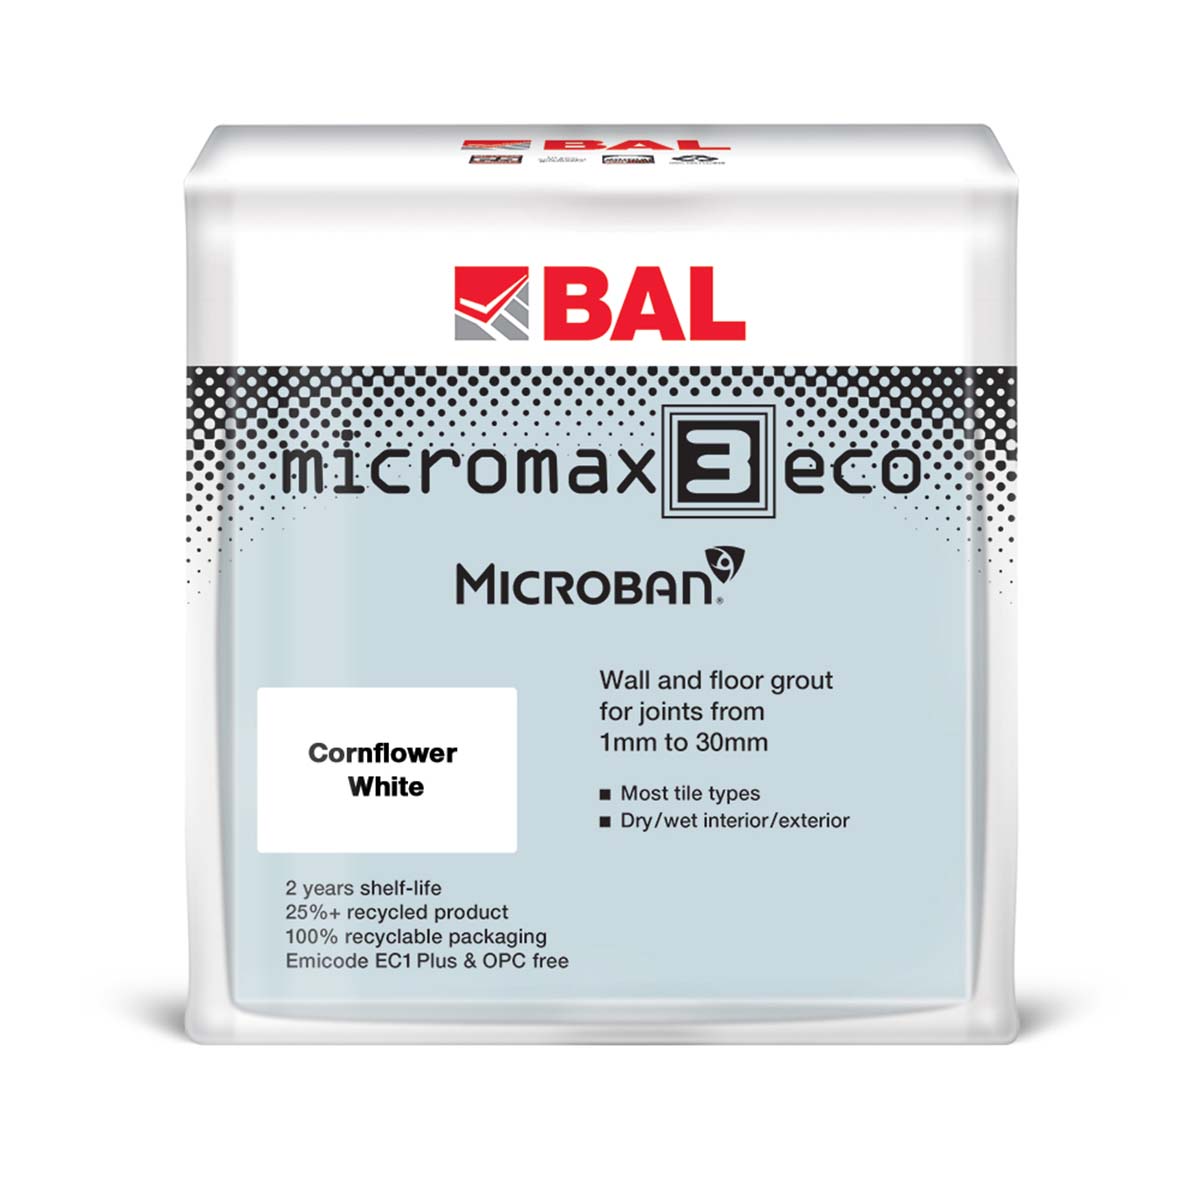 BAL micromax 3 eco wall and floor tile adhesive cornflower white